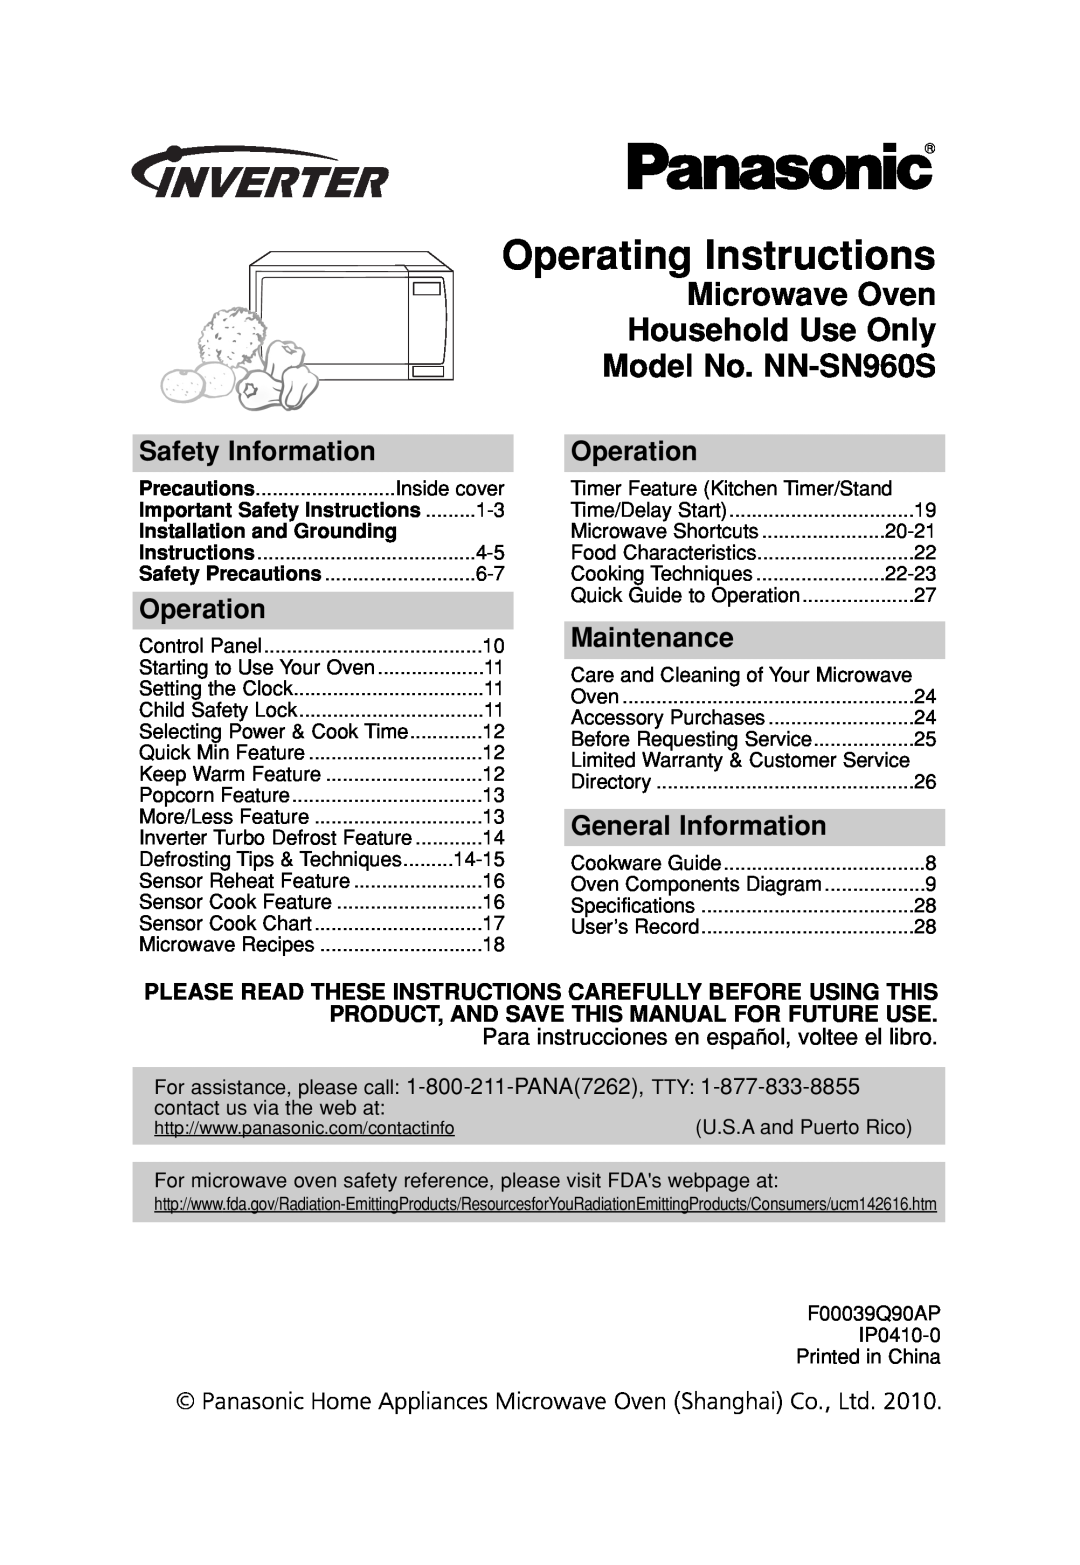 Panasonic operating instructions Operating Instructions, Microwave Oven Household Use Only Model No. NN-SN960S 